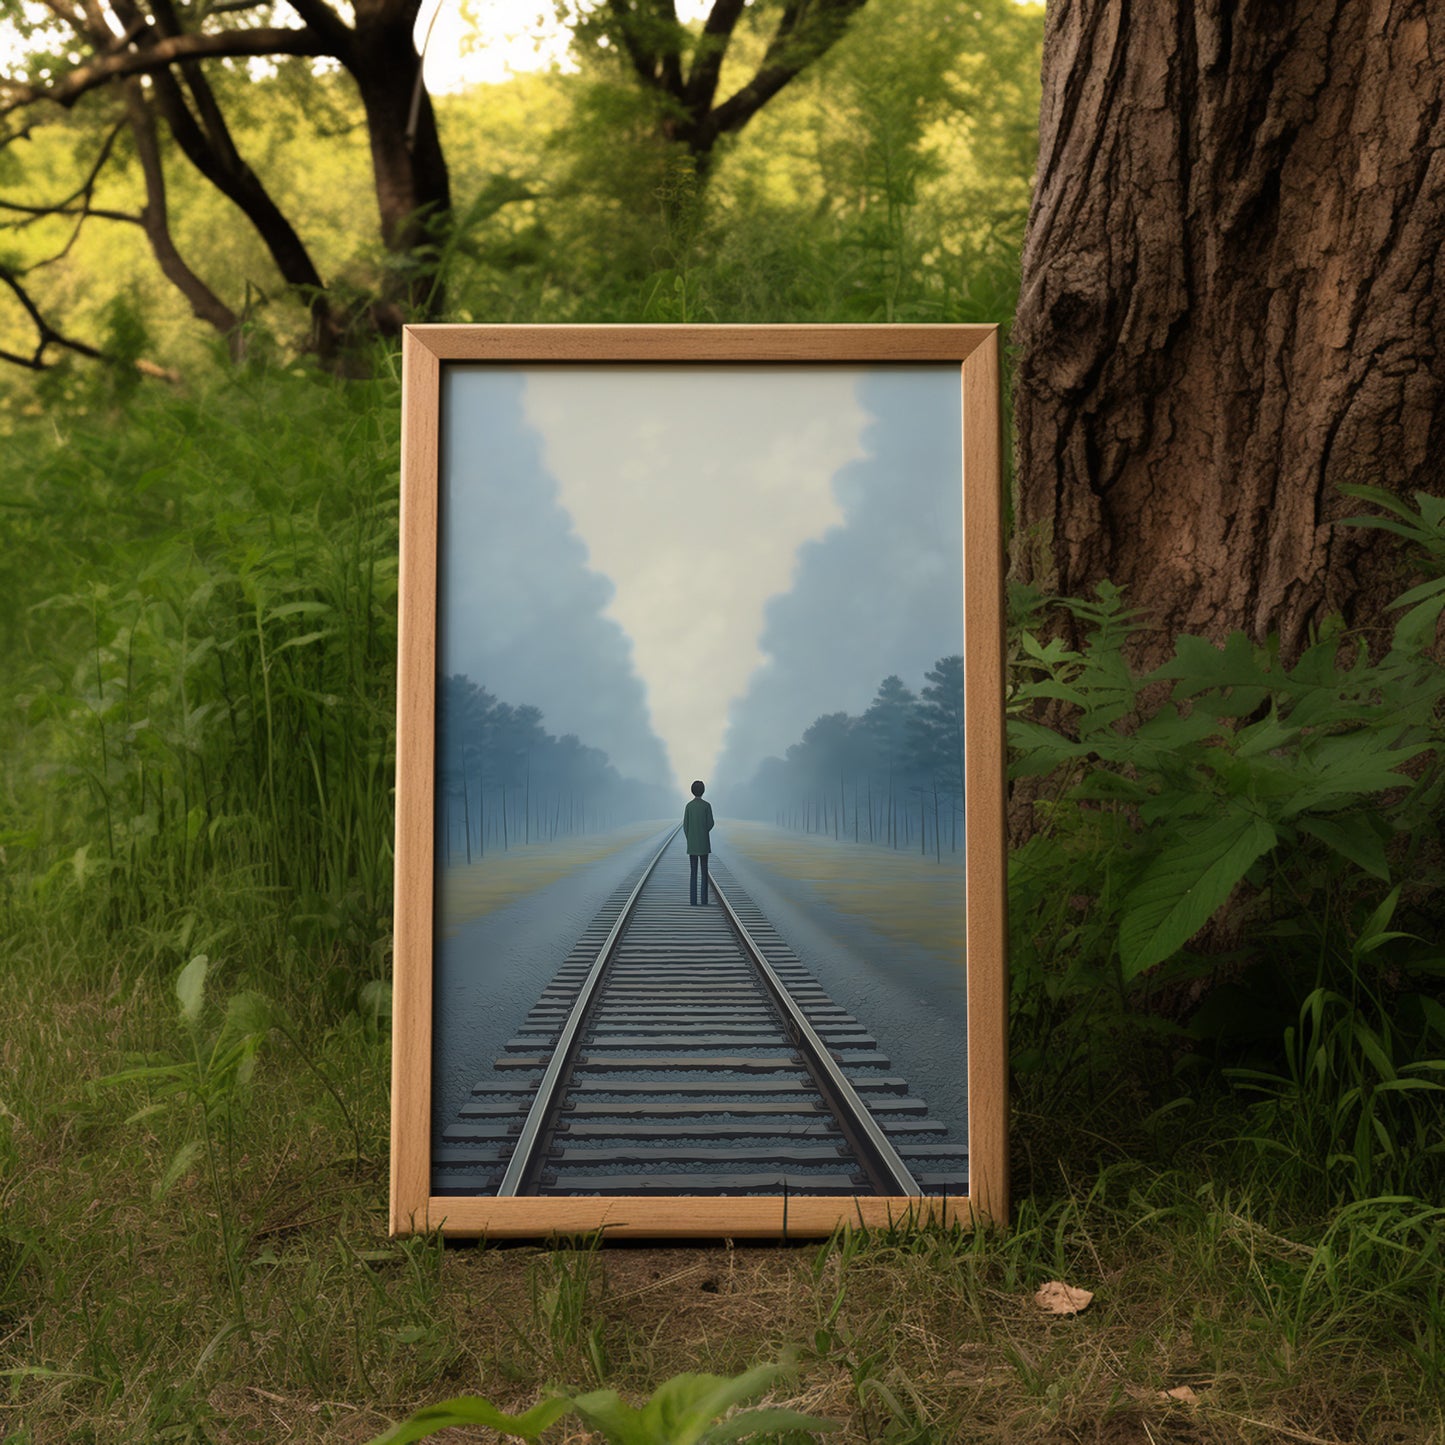 A framed picture of a person on railroad tracks extending to the horizon, placed in a forest.